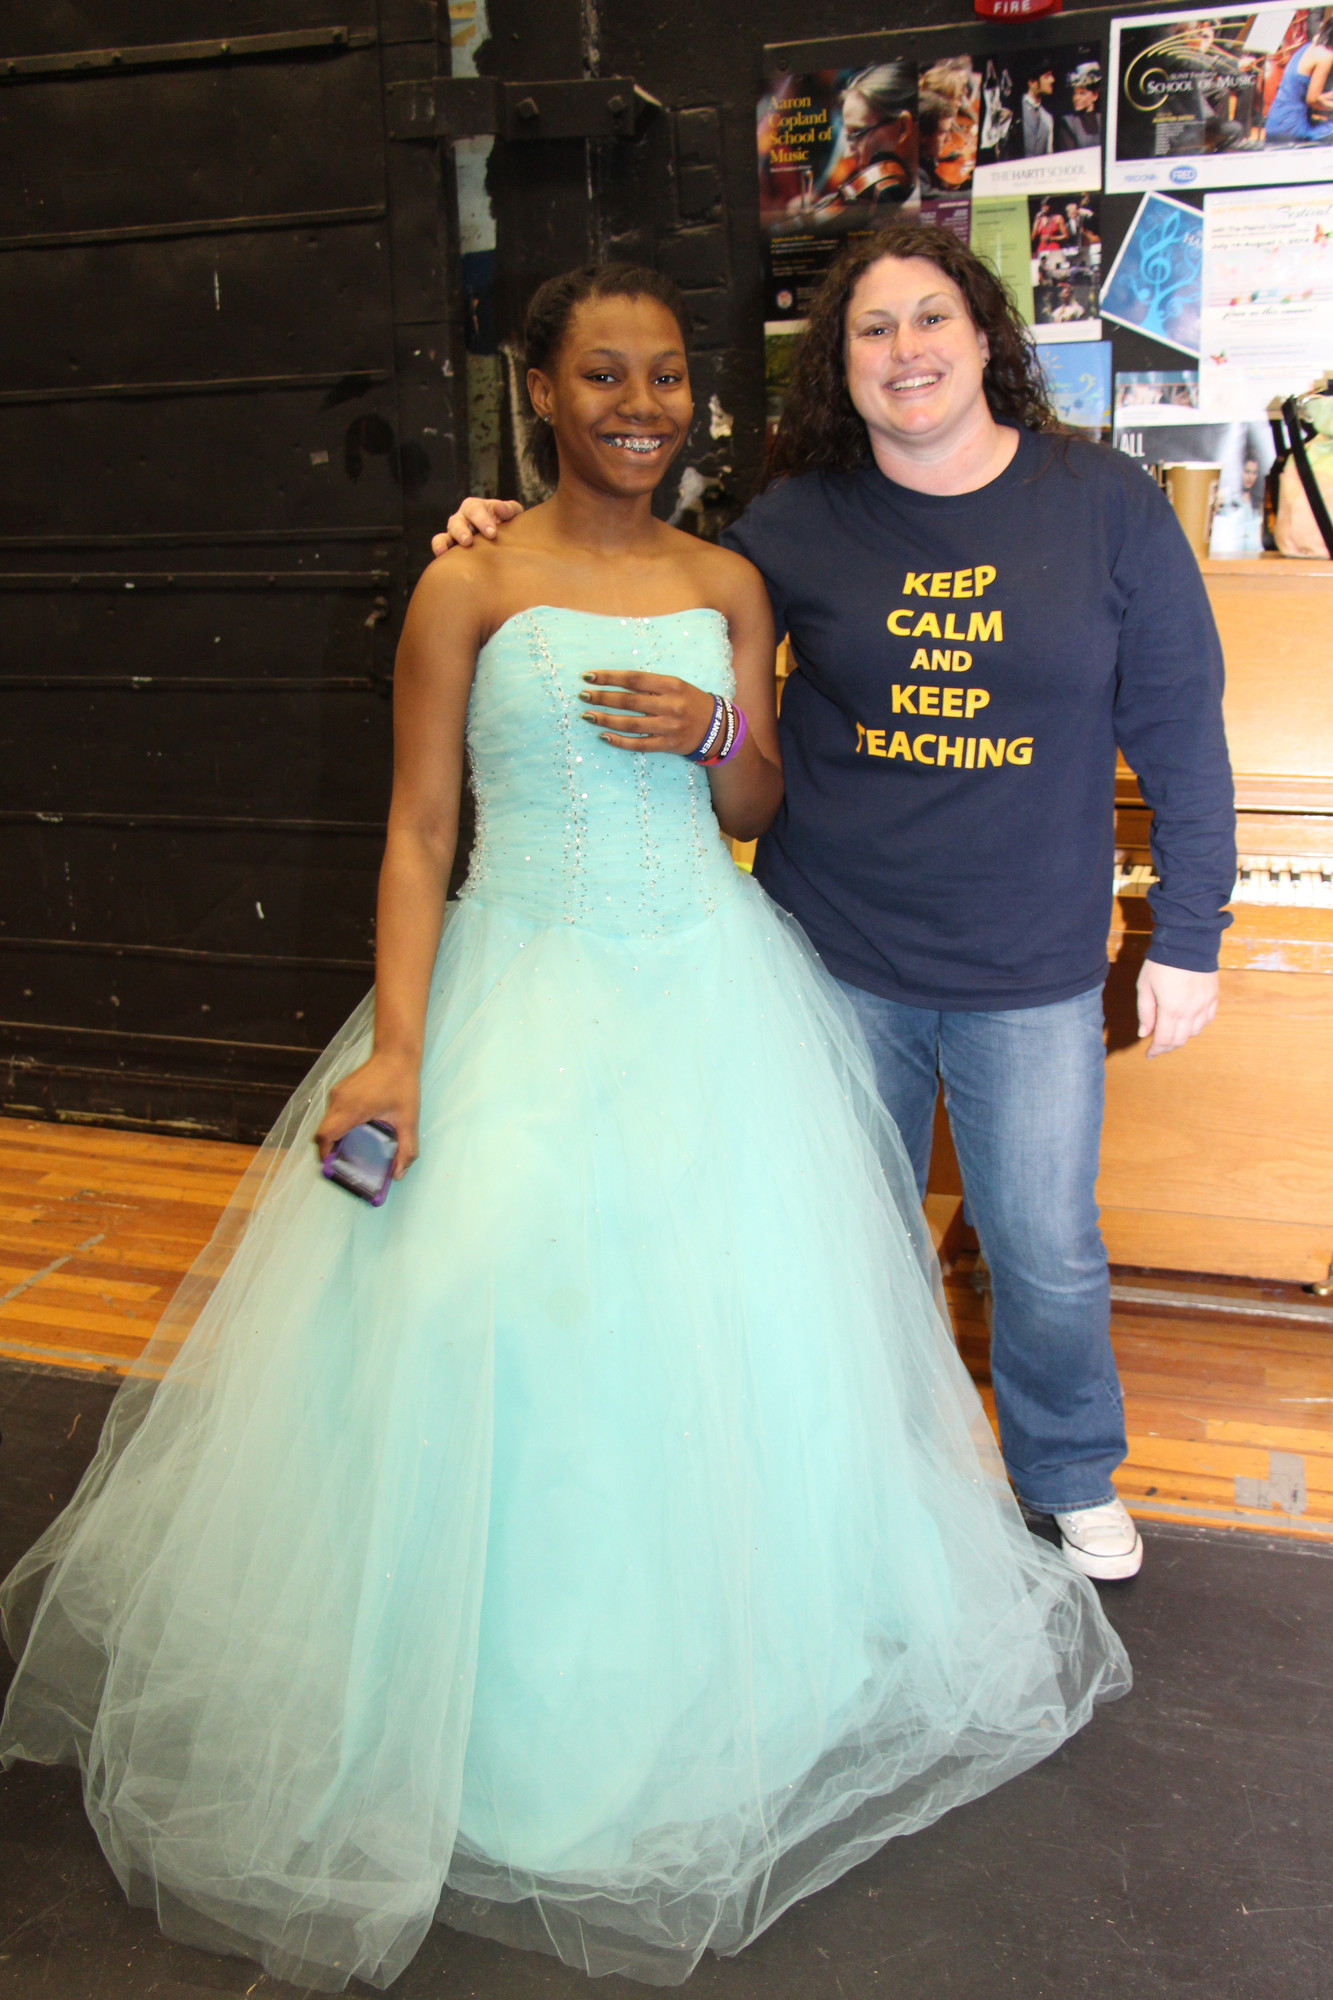 Myoshia Williams said ‘yes to the dress’ after finding the dress that fit her style. Adeline Scibelli, a Baldwin High School teacher, helped the girls find the perfect dress for their special occassion.